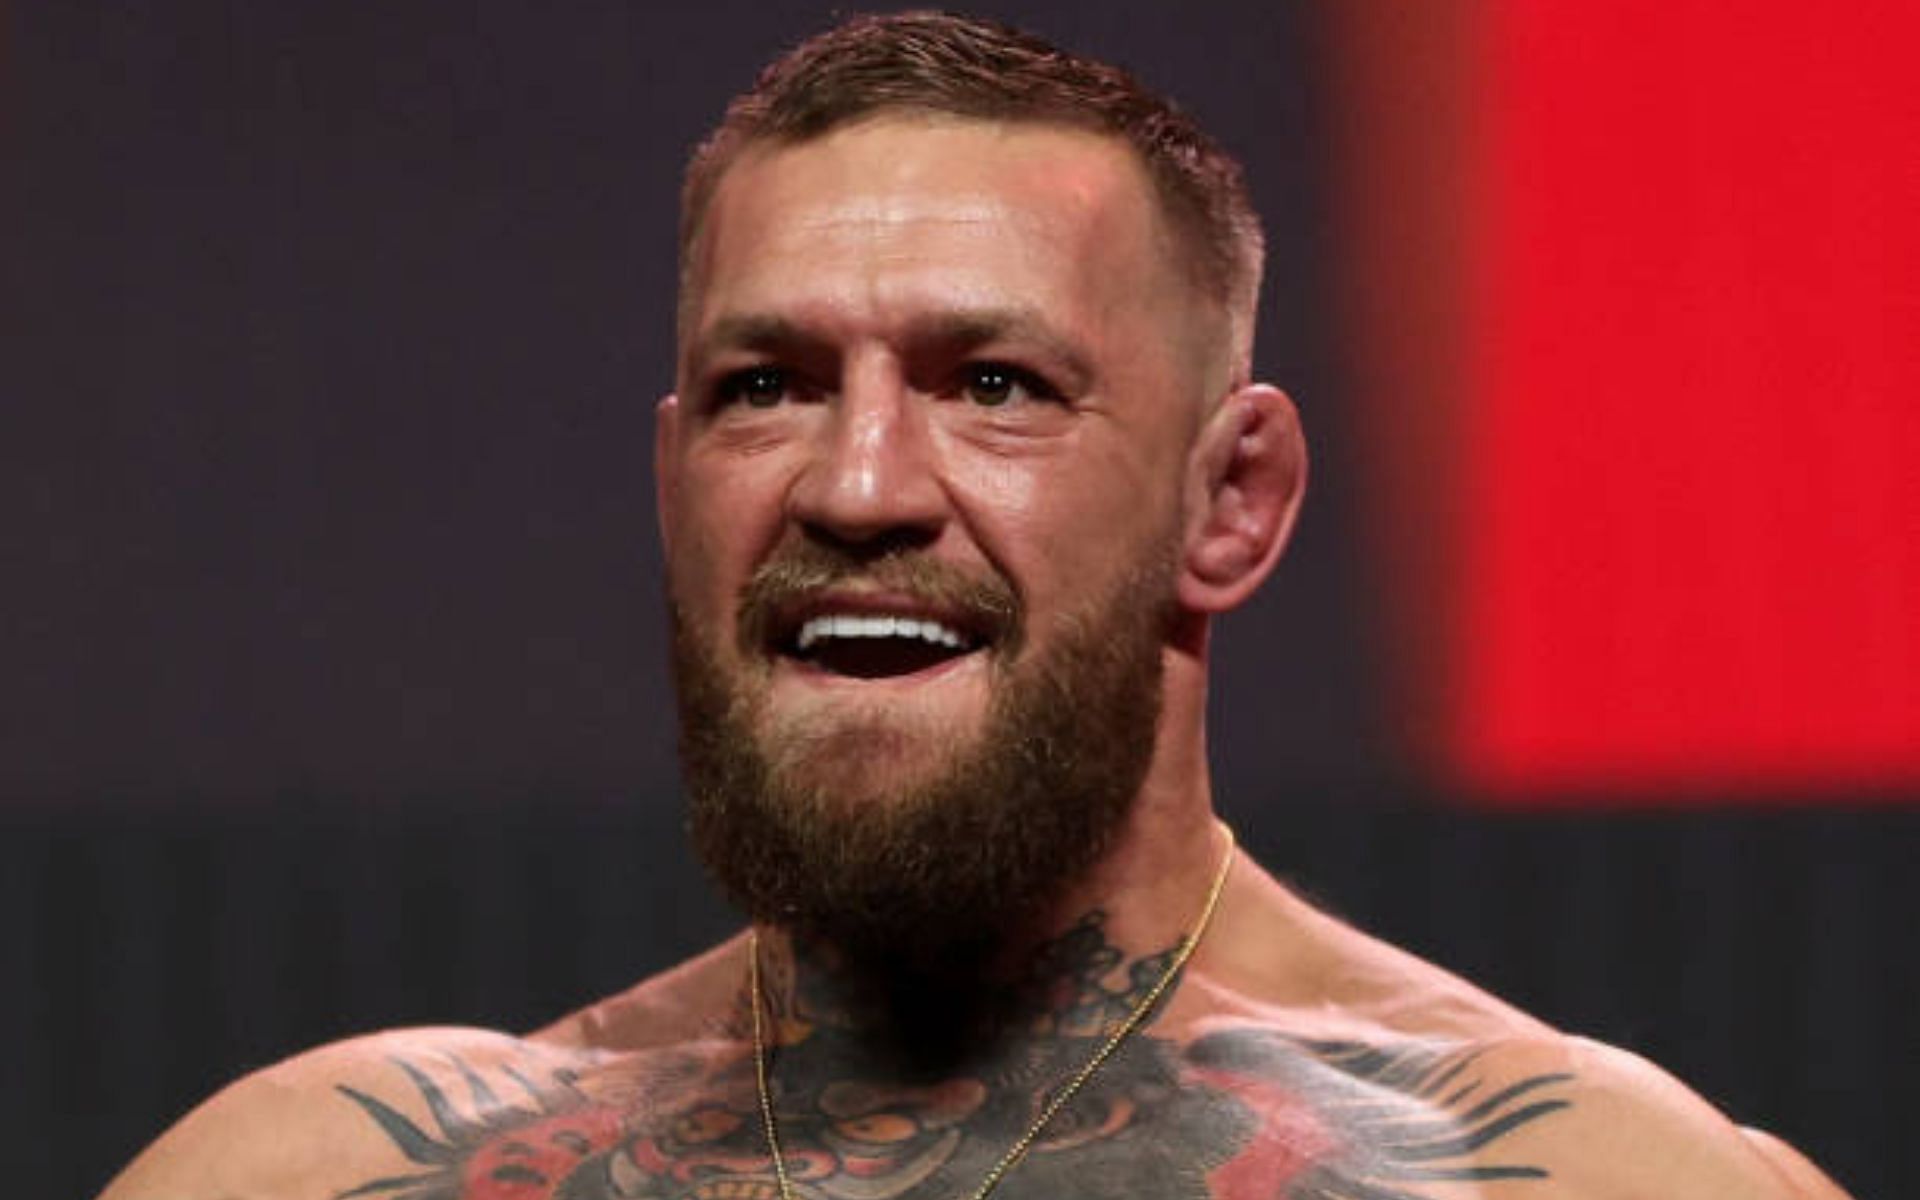 Former double champ Conor McGregor [image courtesy of Getty]